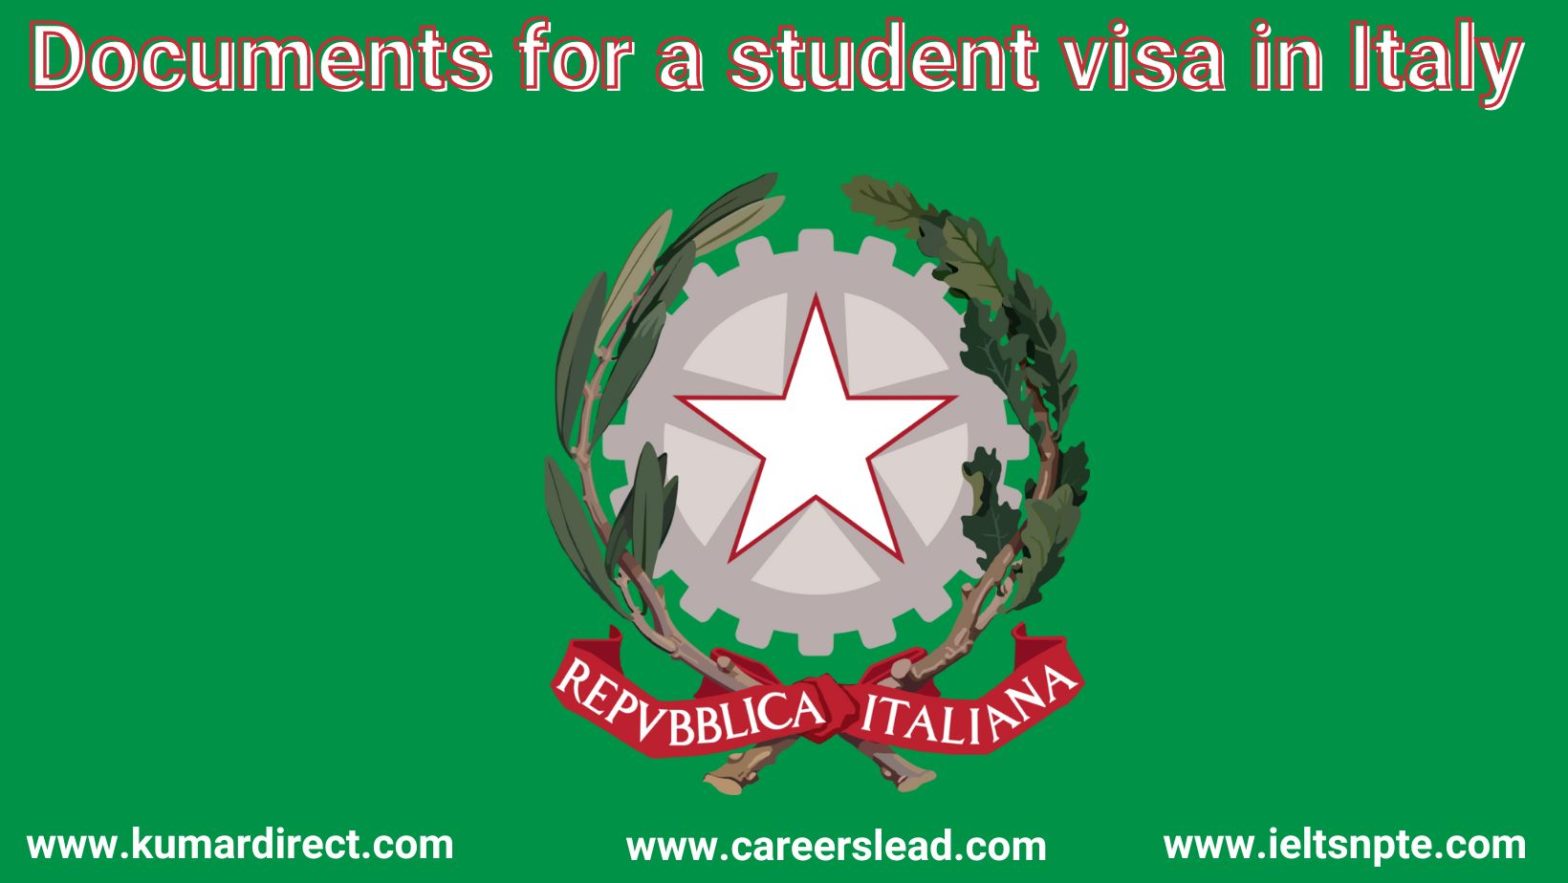 Documents for a student visa in Italy